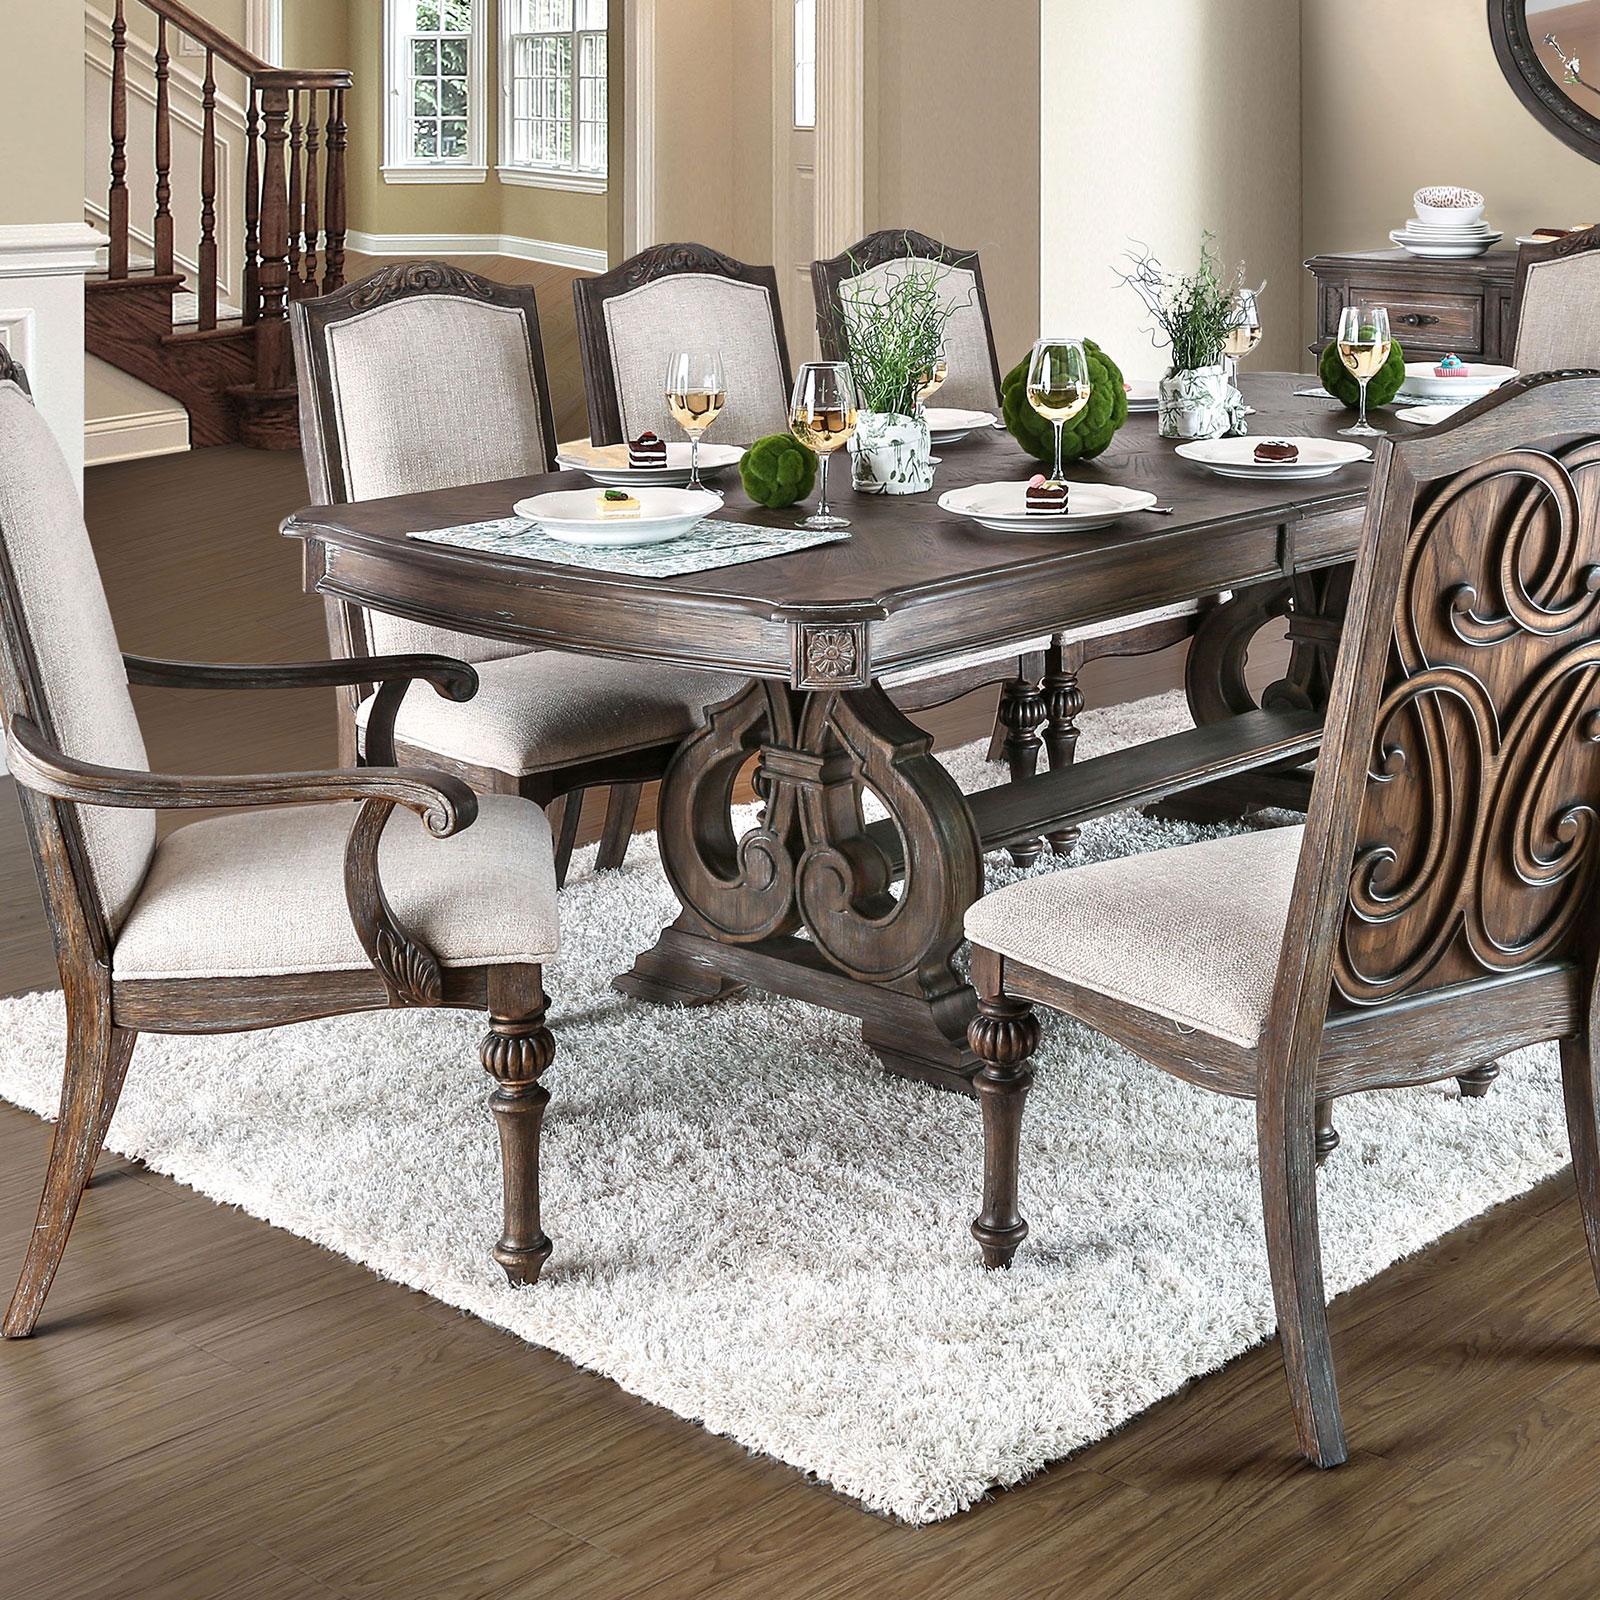 Transitional Dining Table Set ARCADIA CM3150T CM3150T-7PC in Rustic Brown Fabric